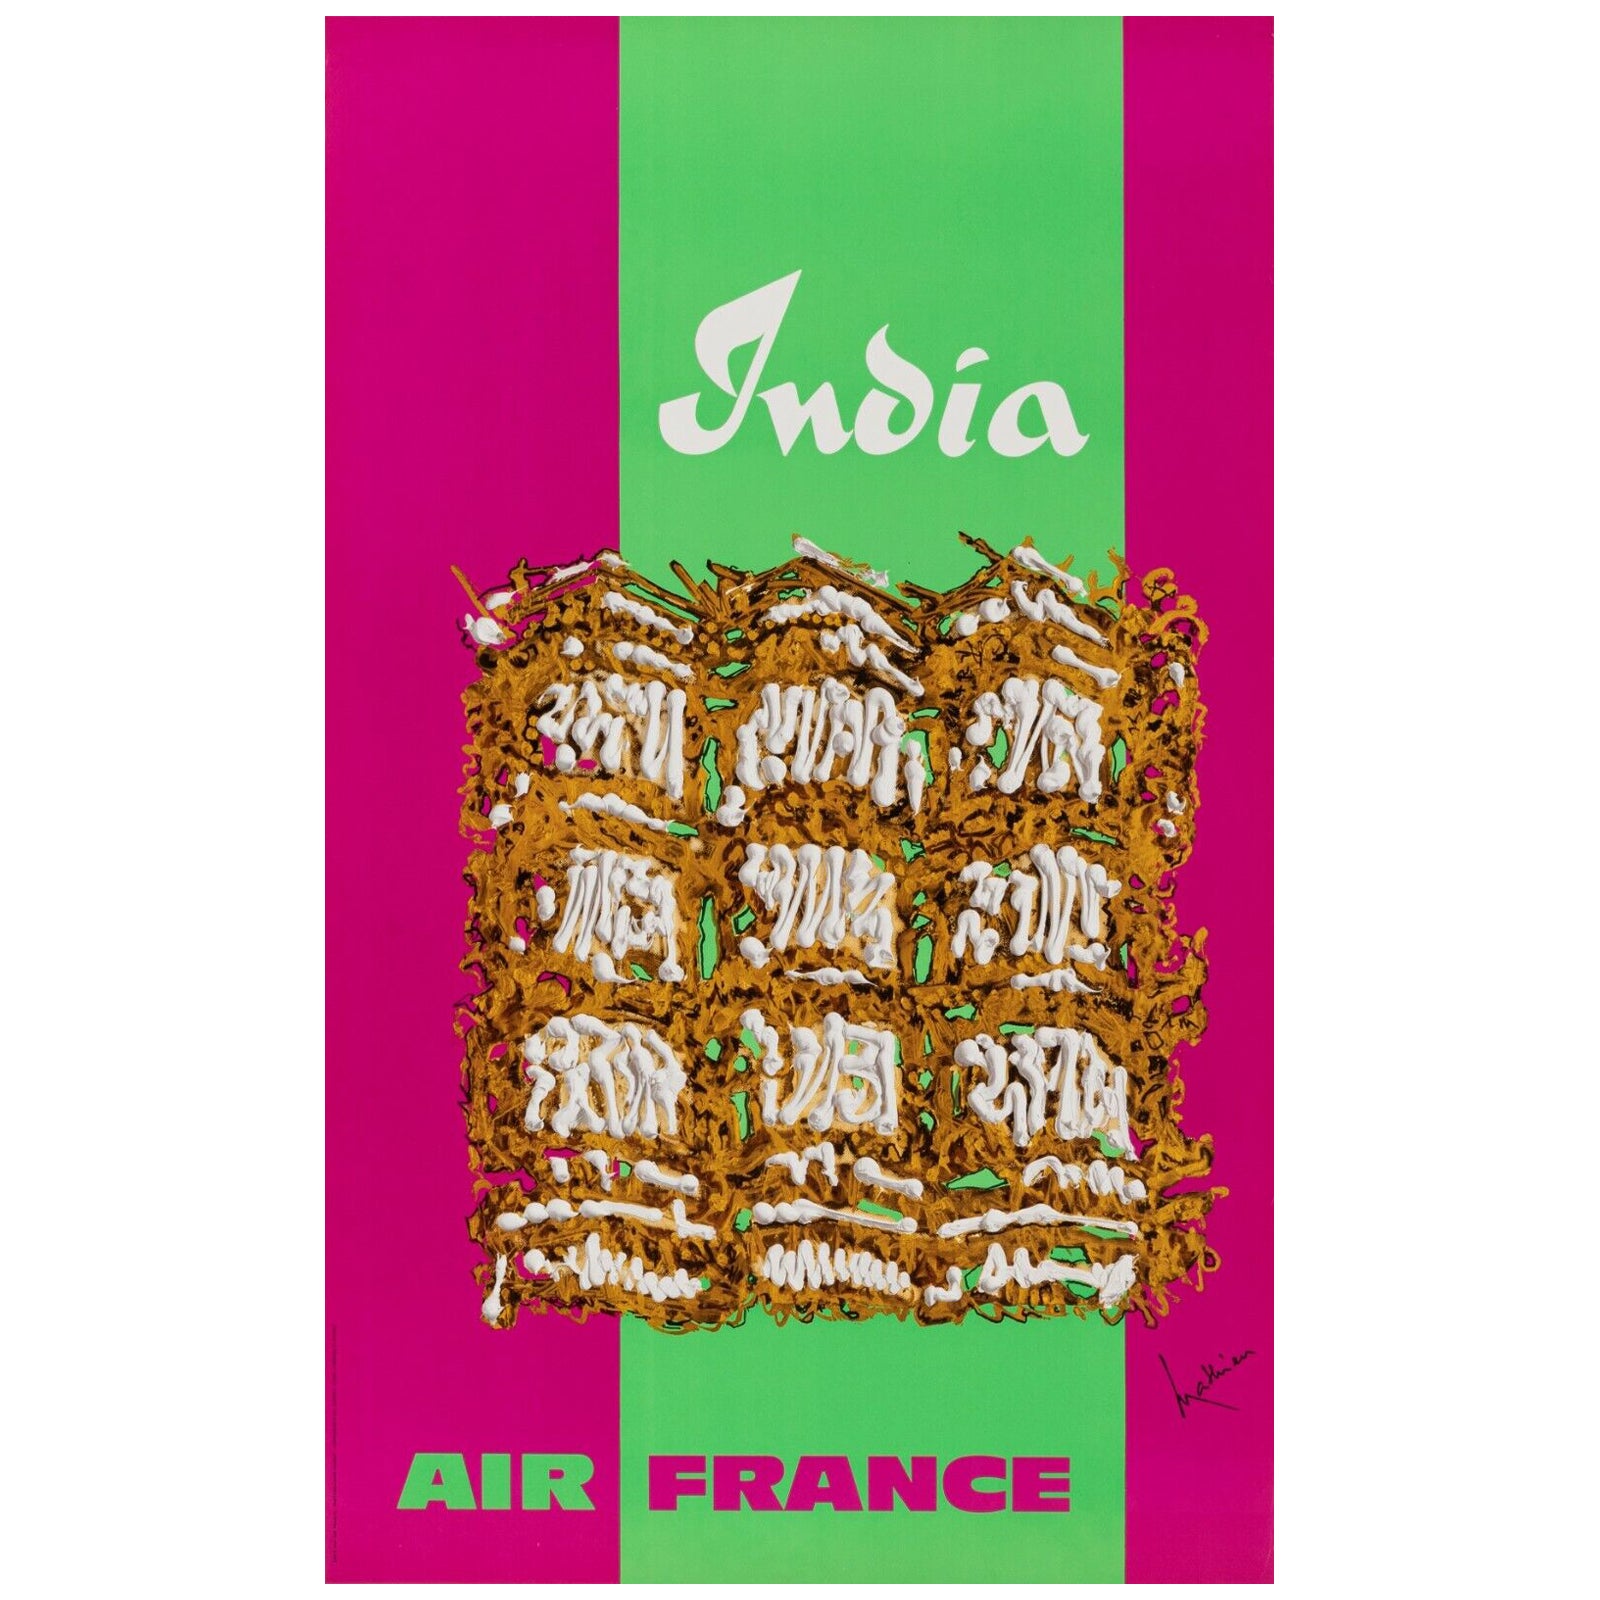 Georges Mathieu , Original Vintage Airline Poster, Air France, India, 1967